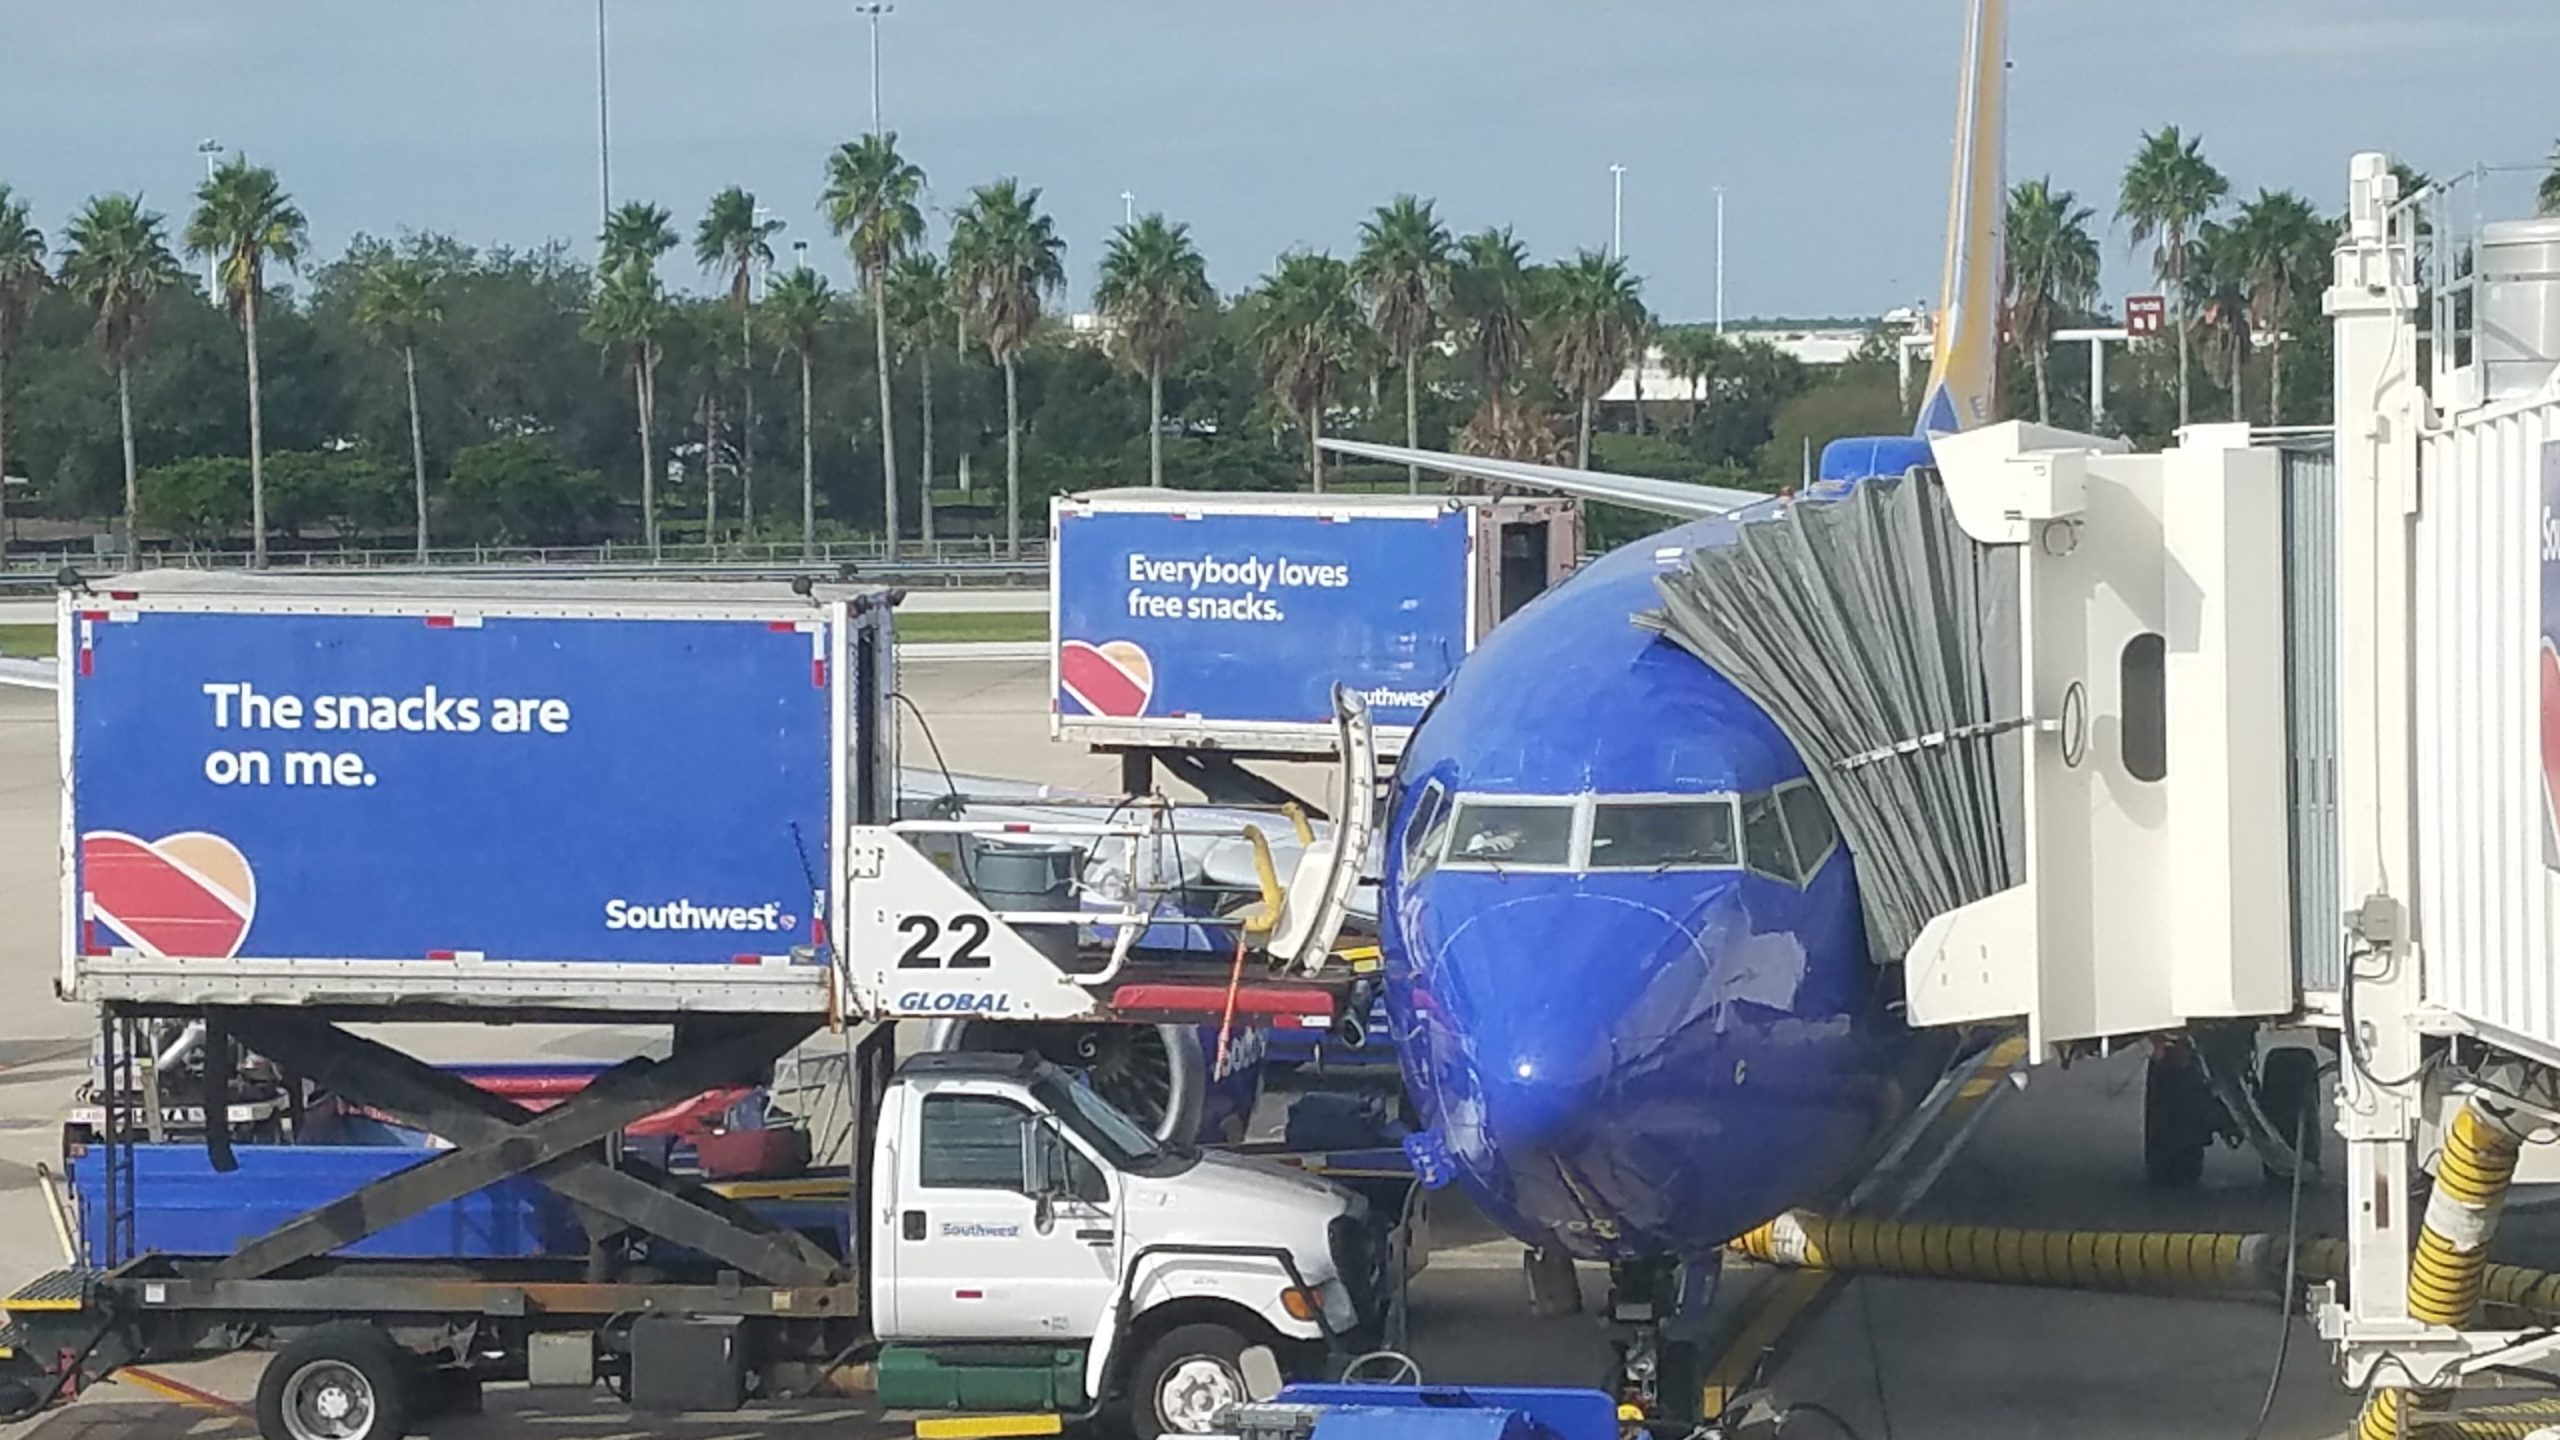 Southwest Airlines Threw Shade At American. Their Pilots Clapped Back.